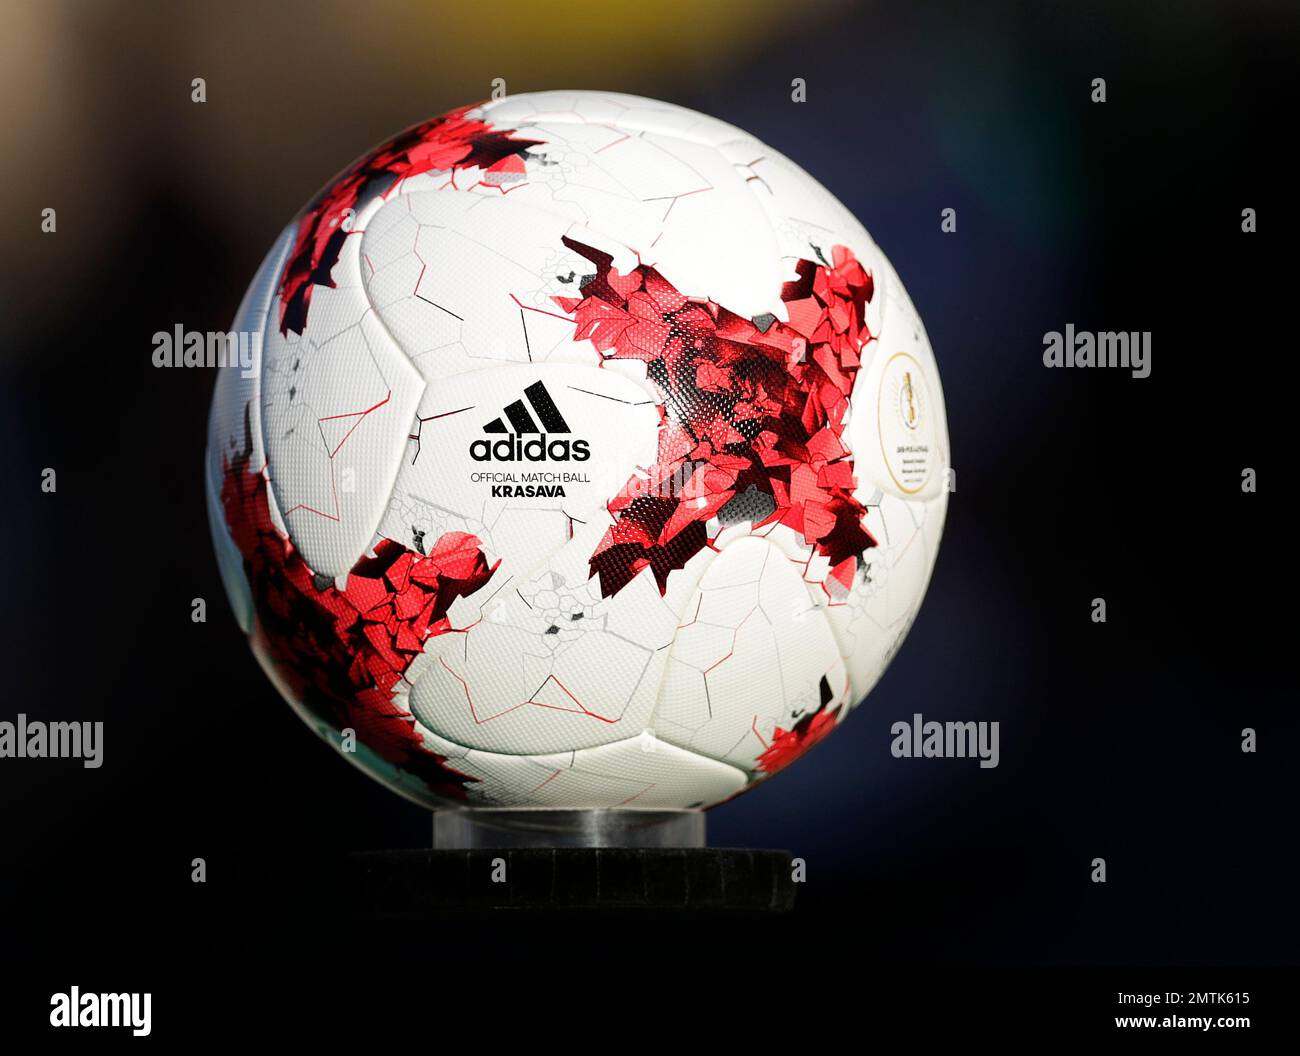 Rotere foragte kat The new Adidas 'Krasava' soccer ball for the upcoming Confederations Cup in  Russia is displayed prior to the German soccer cup final match between  Borussia Dortmund and Eintracht Frankfurt in Berlin, Germany,